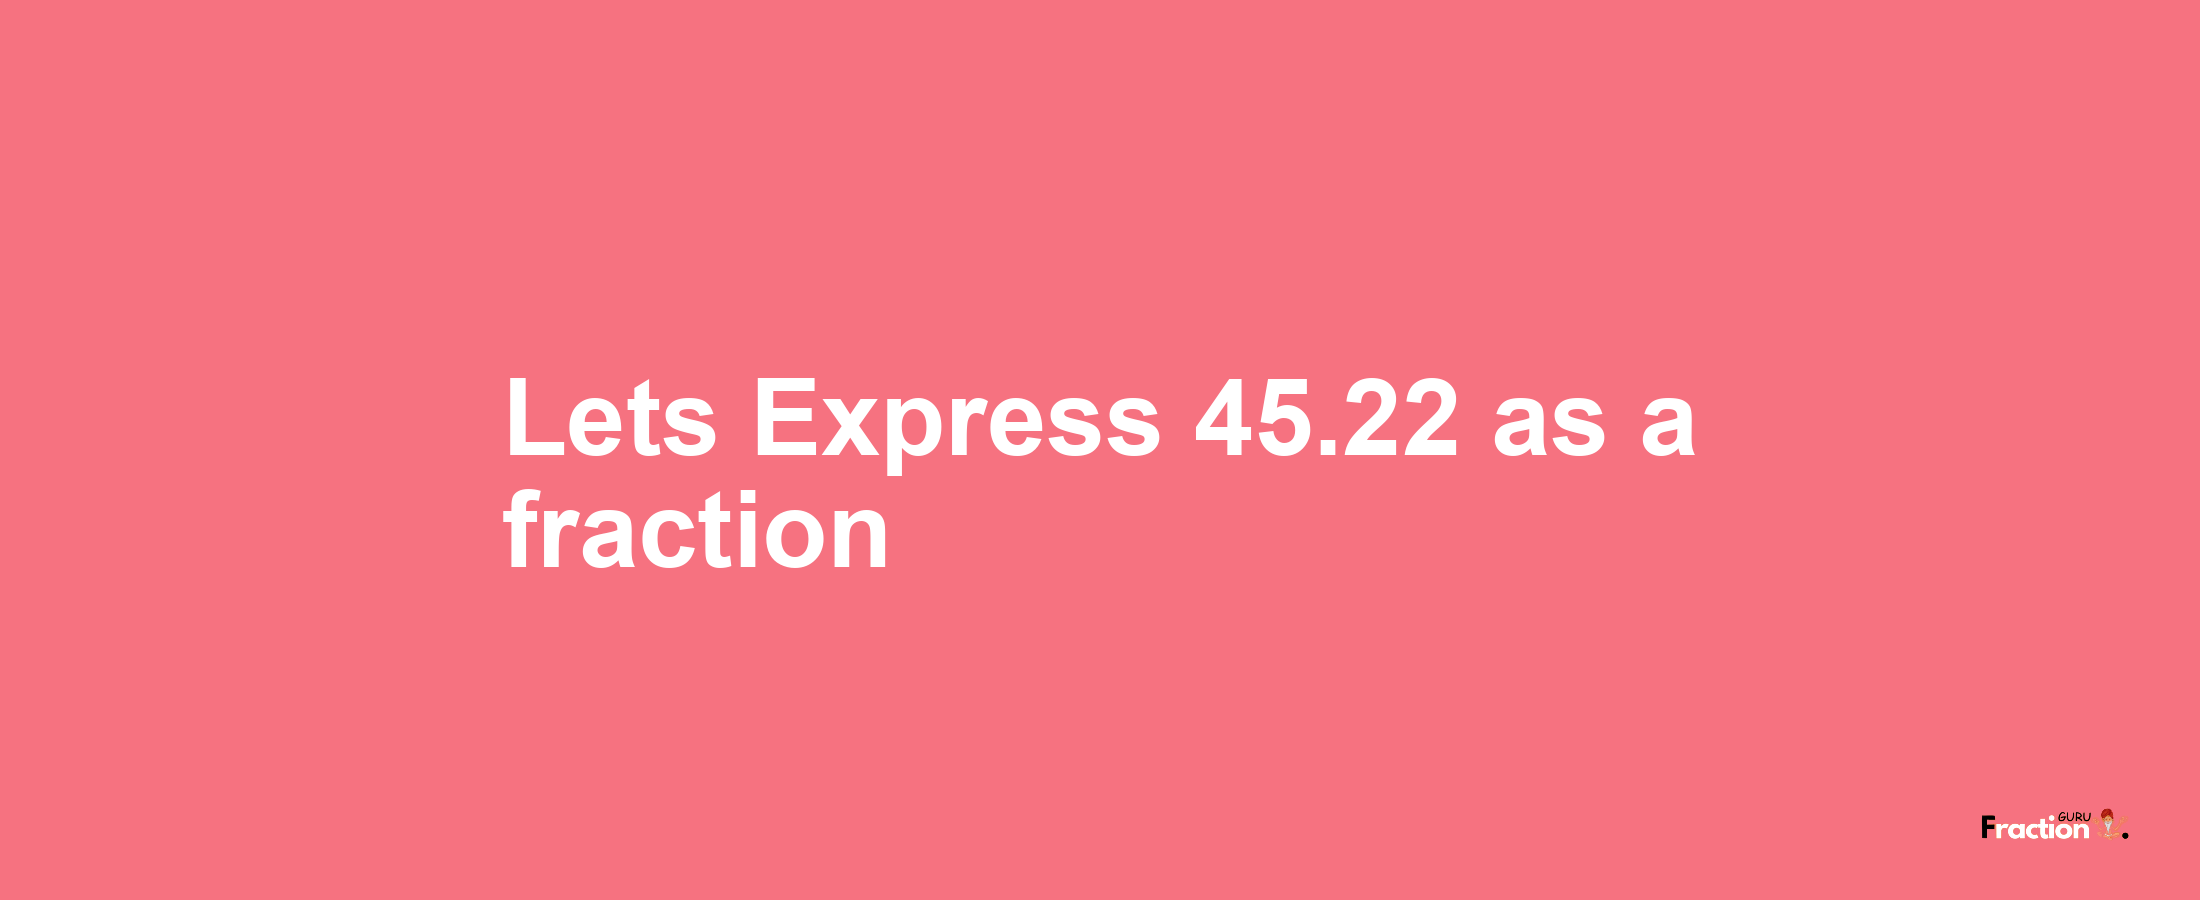 Lets Express 45.22 as afraction